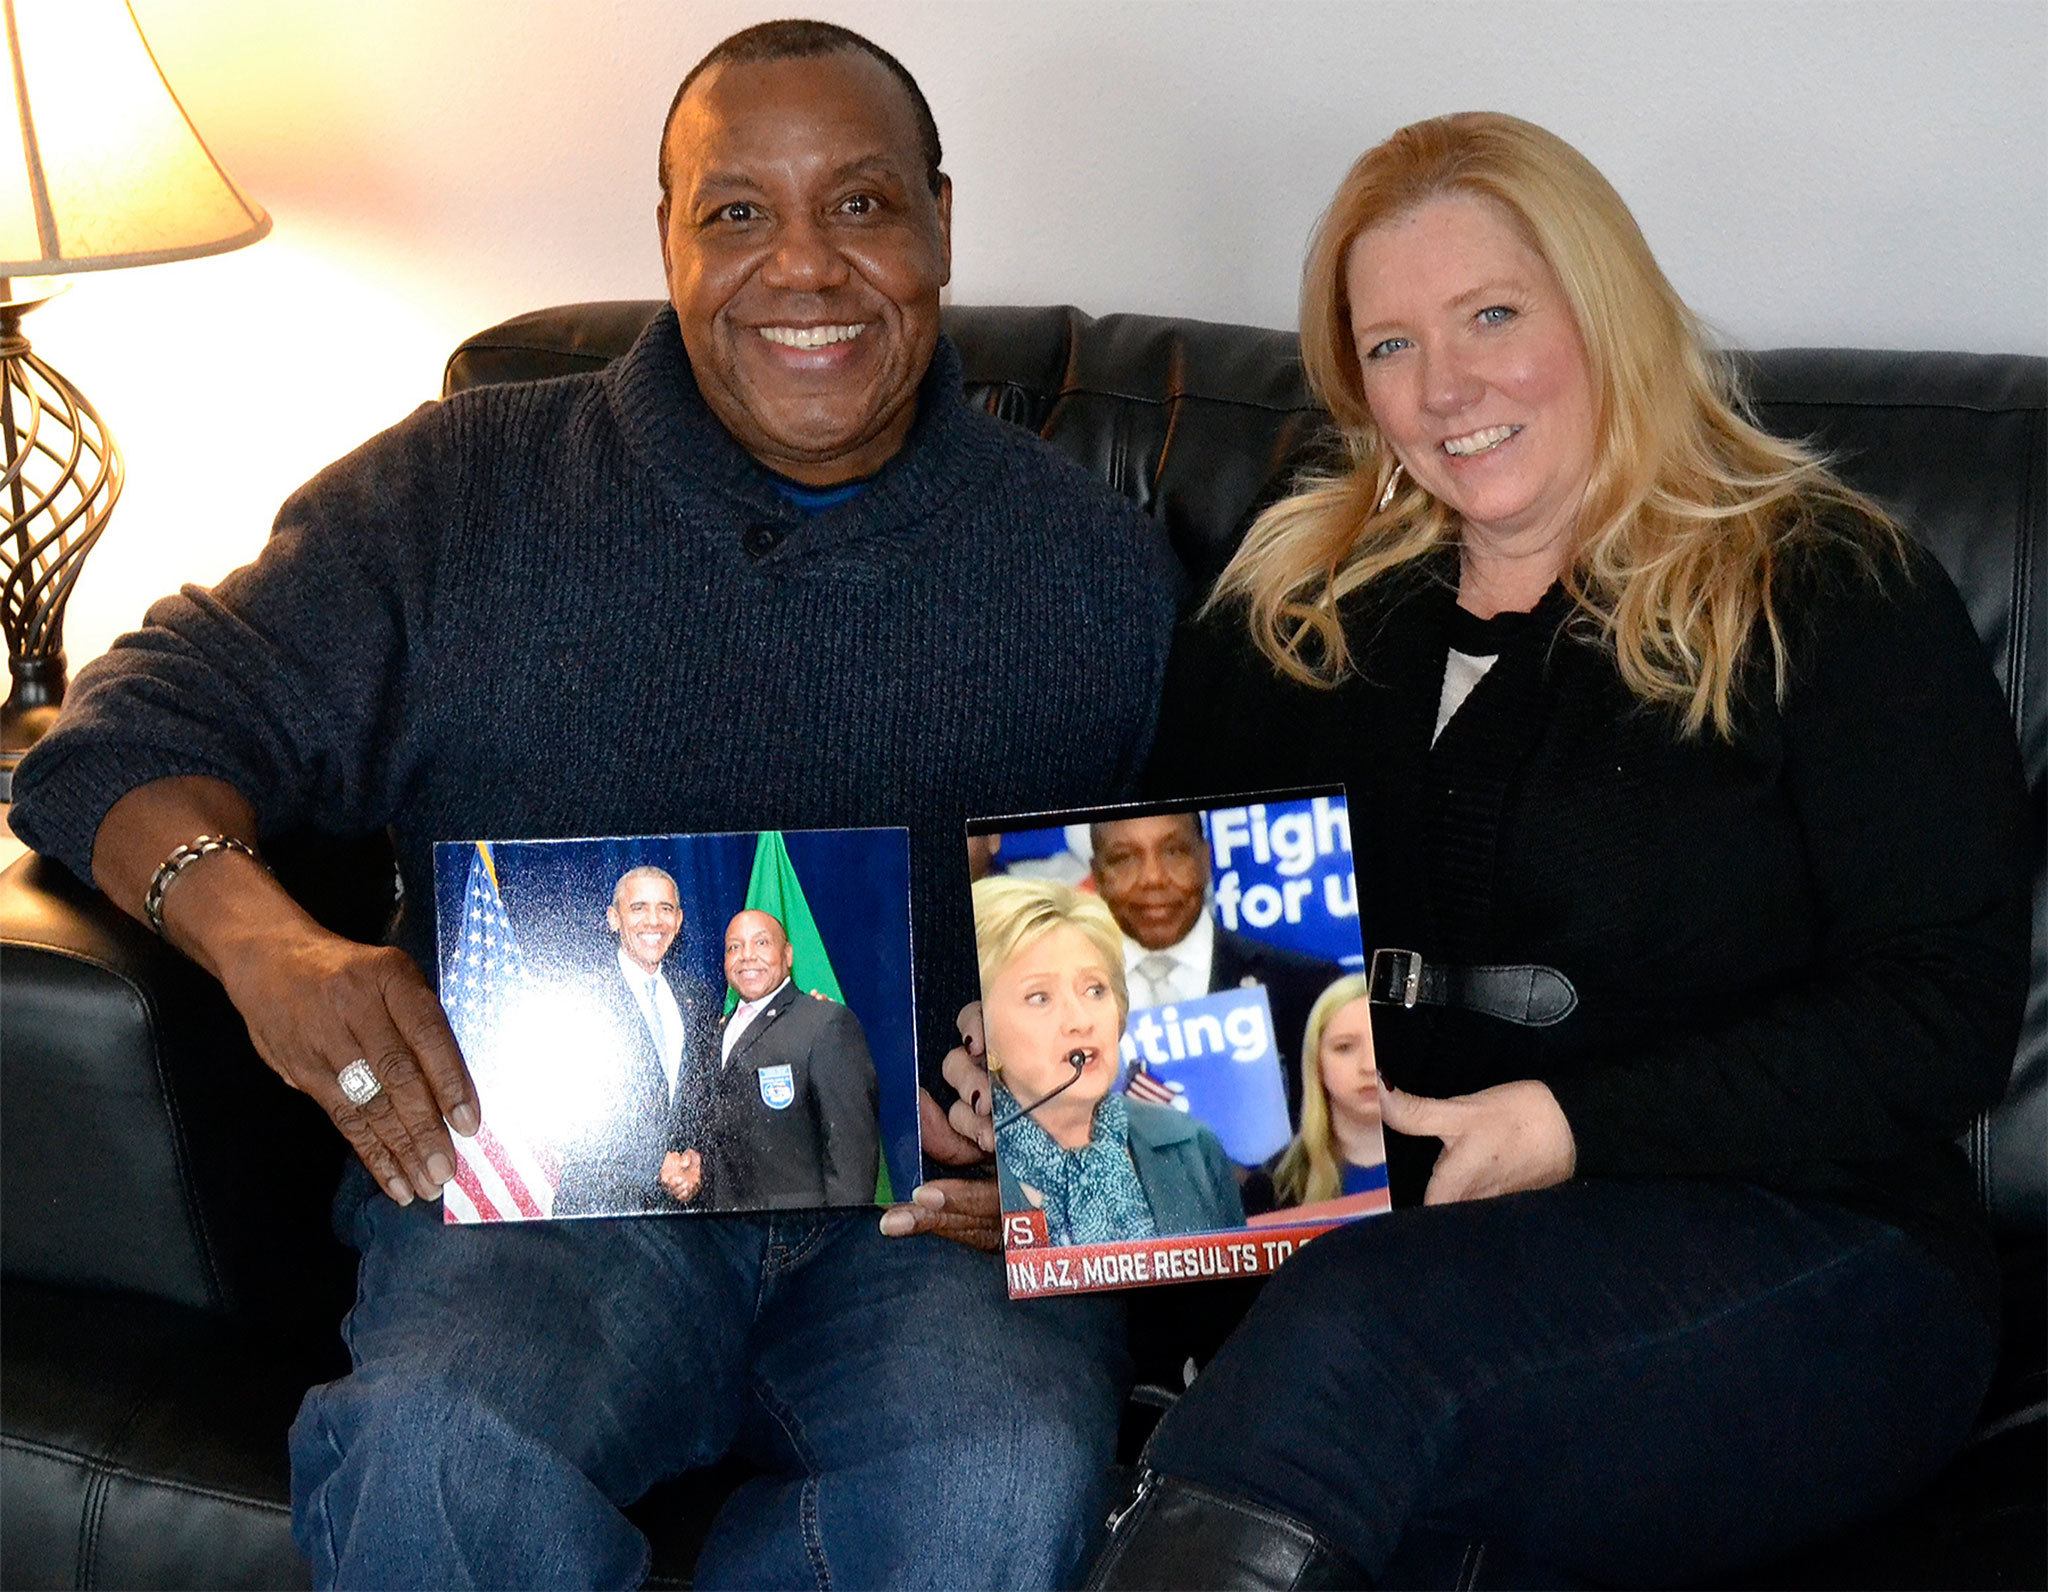 Longtime Marysville Democrat Raymond Miller holds a photo he took with President Obama, while his wife, Jennifer, holds one of her husband and presidential candidate Hillary Clinton. (Steve Powell/Staff Photo)